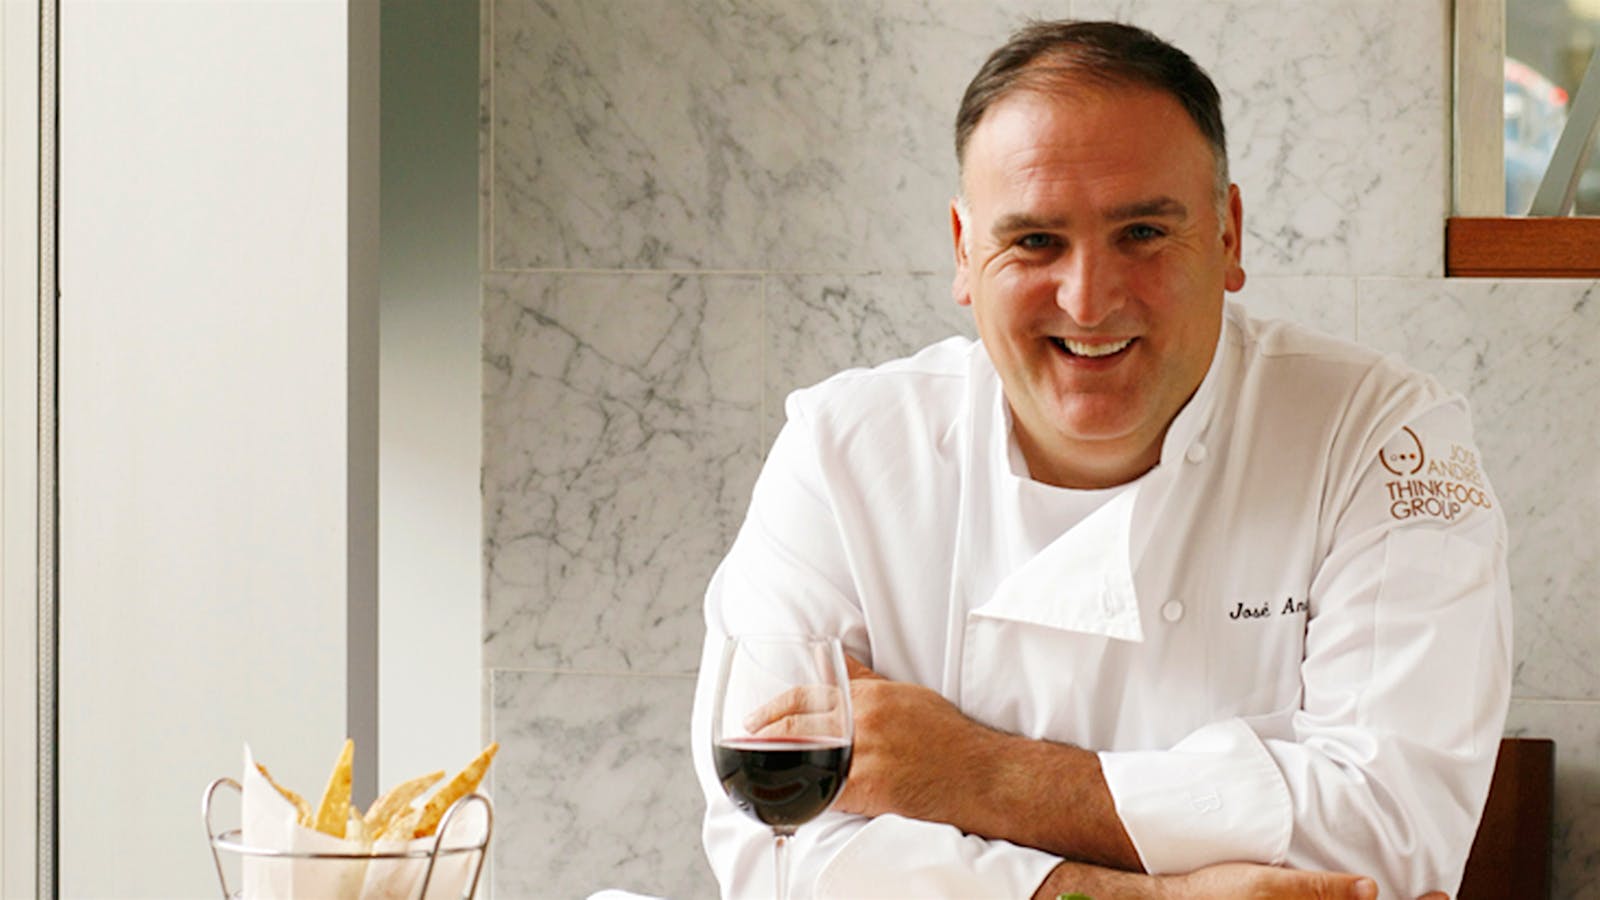 José Andrés with a glass of red wine